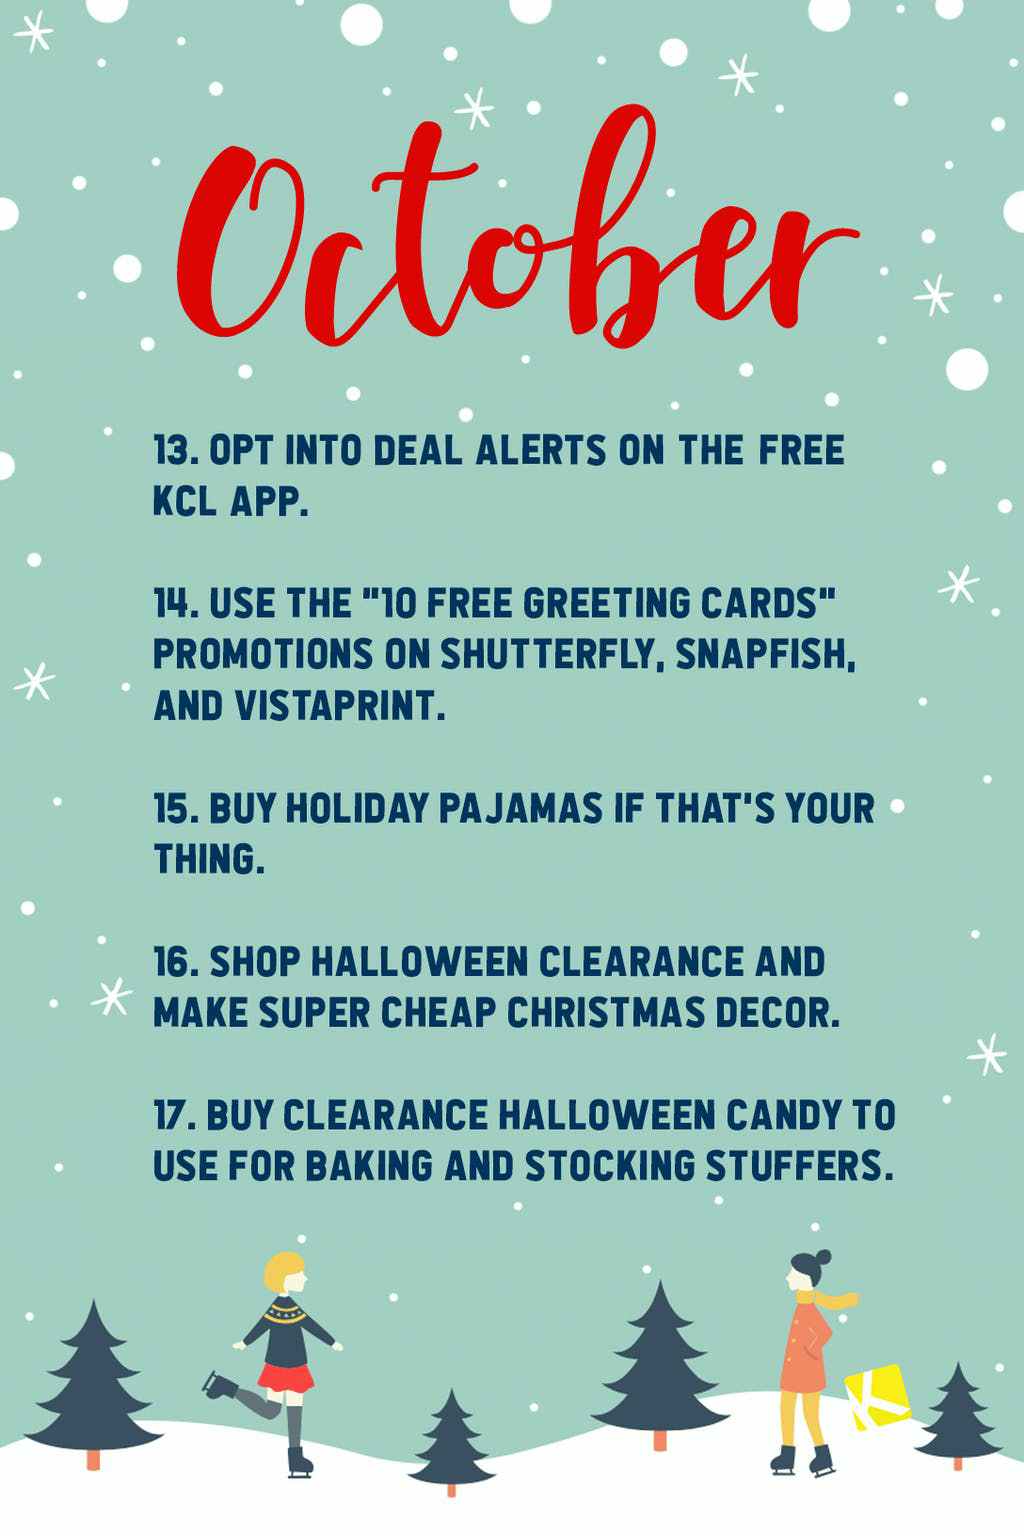 https://prod-cdn-thekrazycouponlady.imgix.net/wp-content/uploads/2018/07/christmas-to-do-list-october-1628694830-1628694831.png?auto=format&fit=fill&q=25